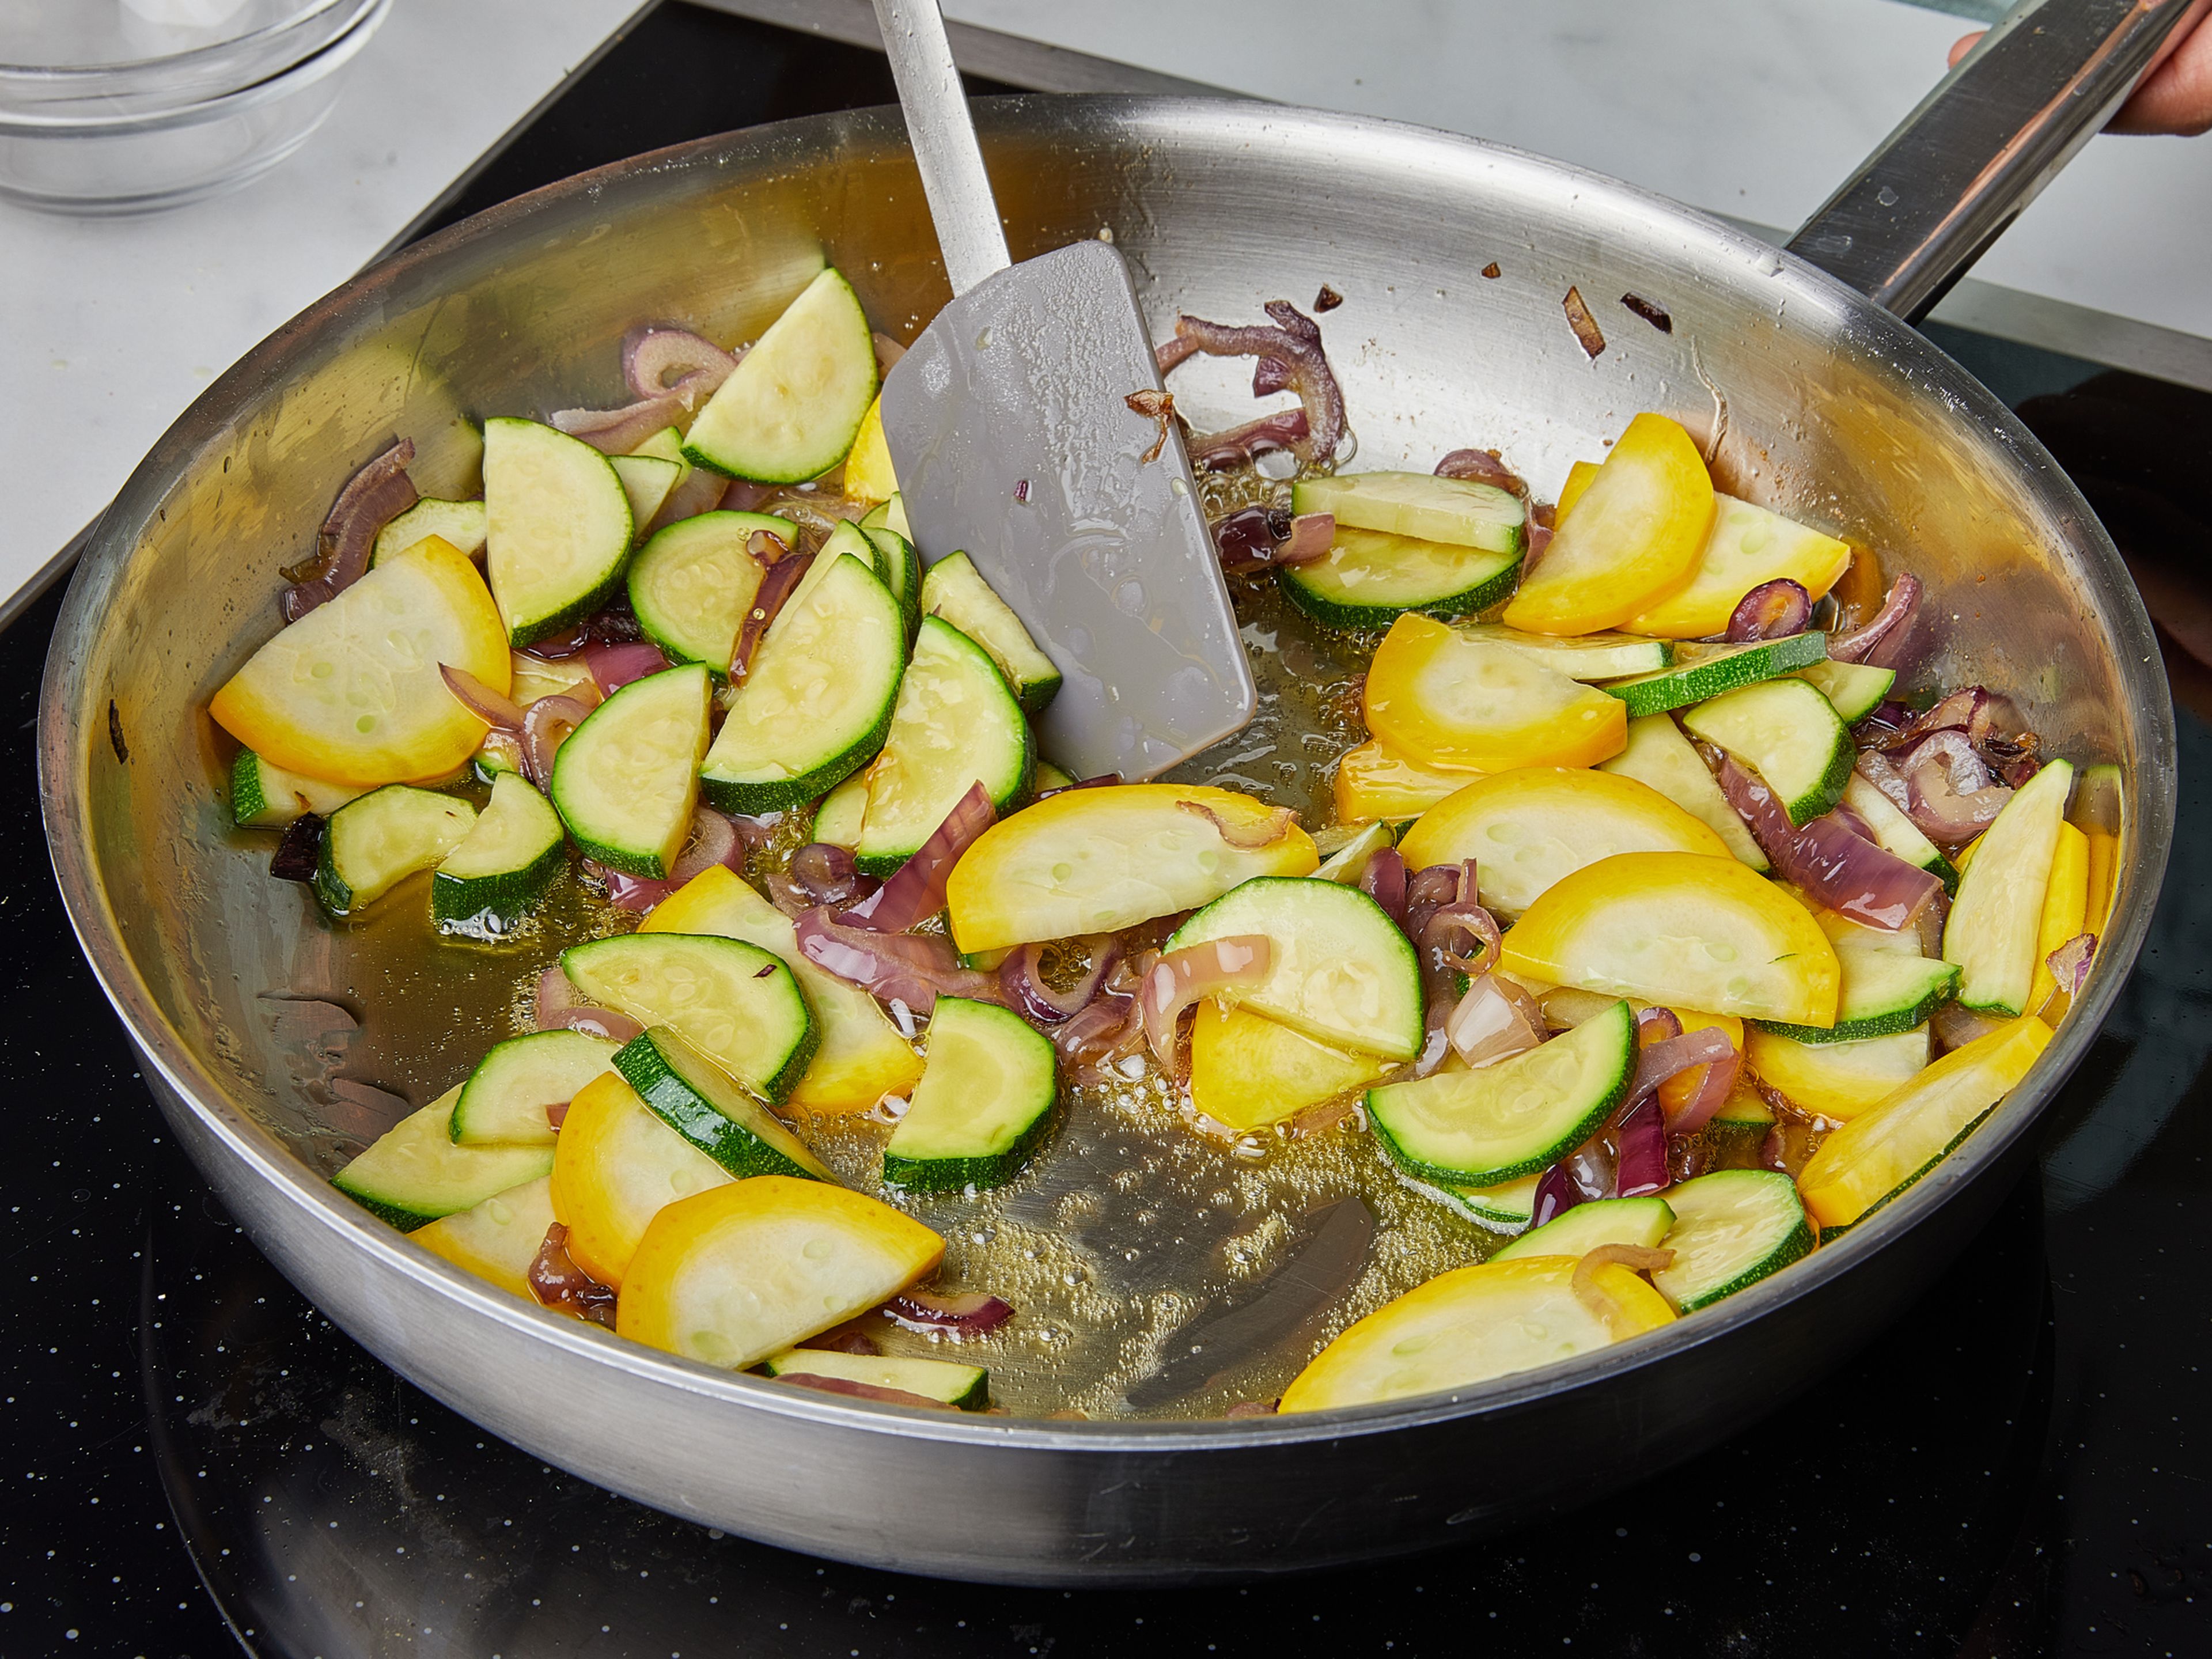 Add ⅔ of the olive oil to a big frying pan. Heat over medium heat and add onions. Season with salt and fry until soft. Add in zucchini slices, season with salt and pepper and fry until soft. You might want to increase the heat here for more char. Add the garlic towards the end of frying, remove from heat and add the zucchini mix to the pasta.